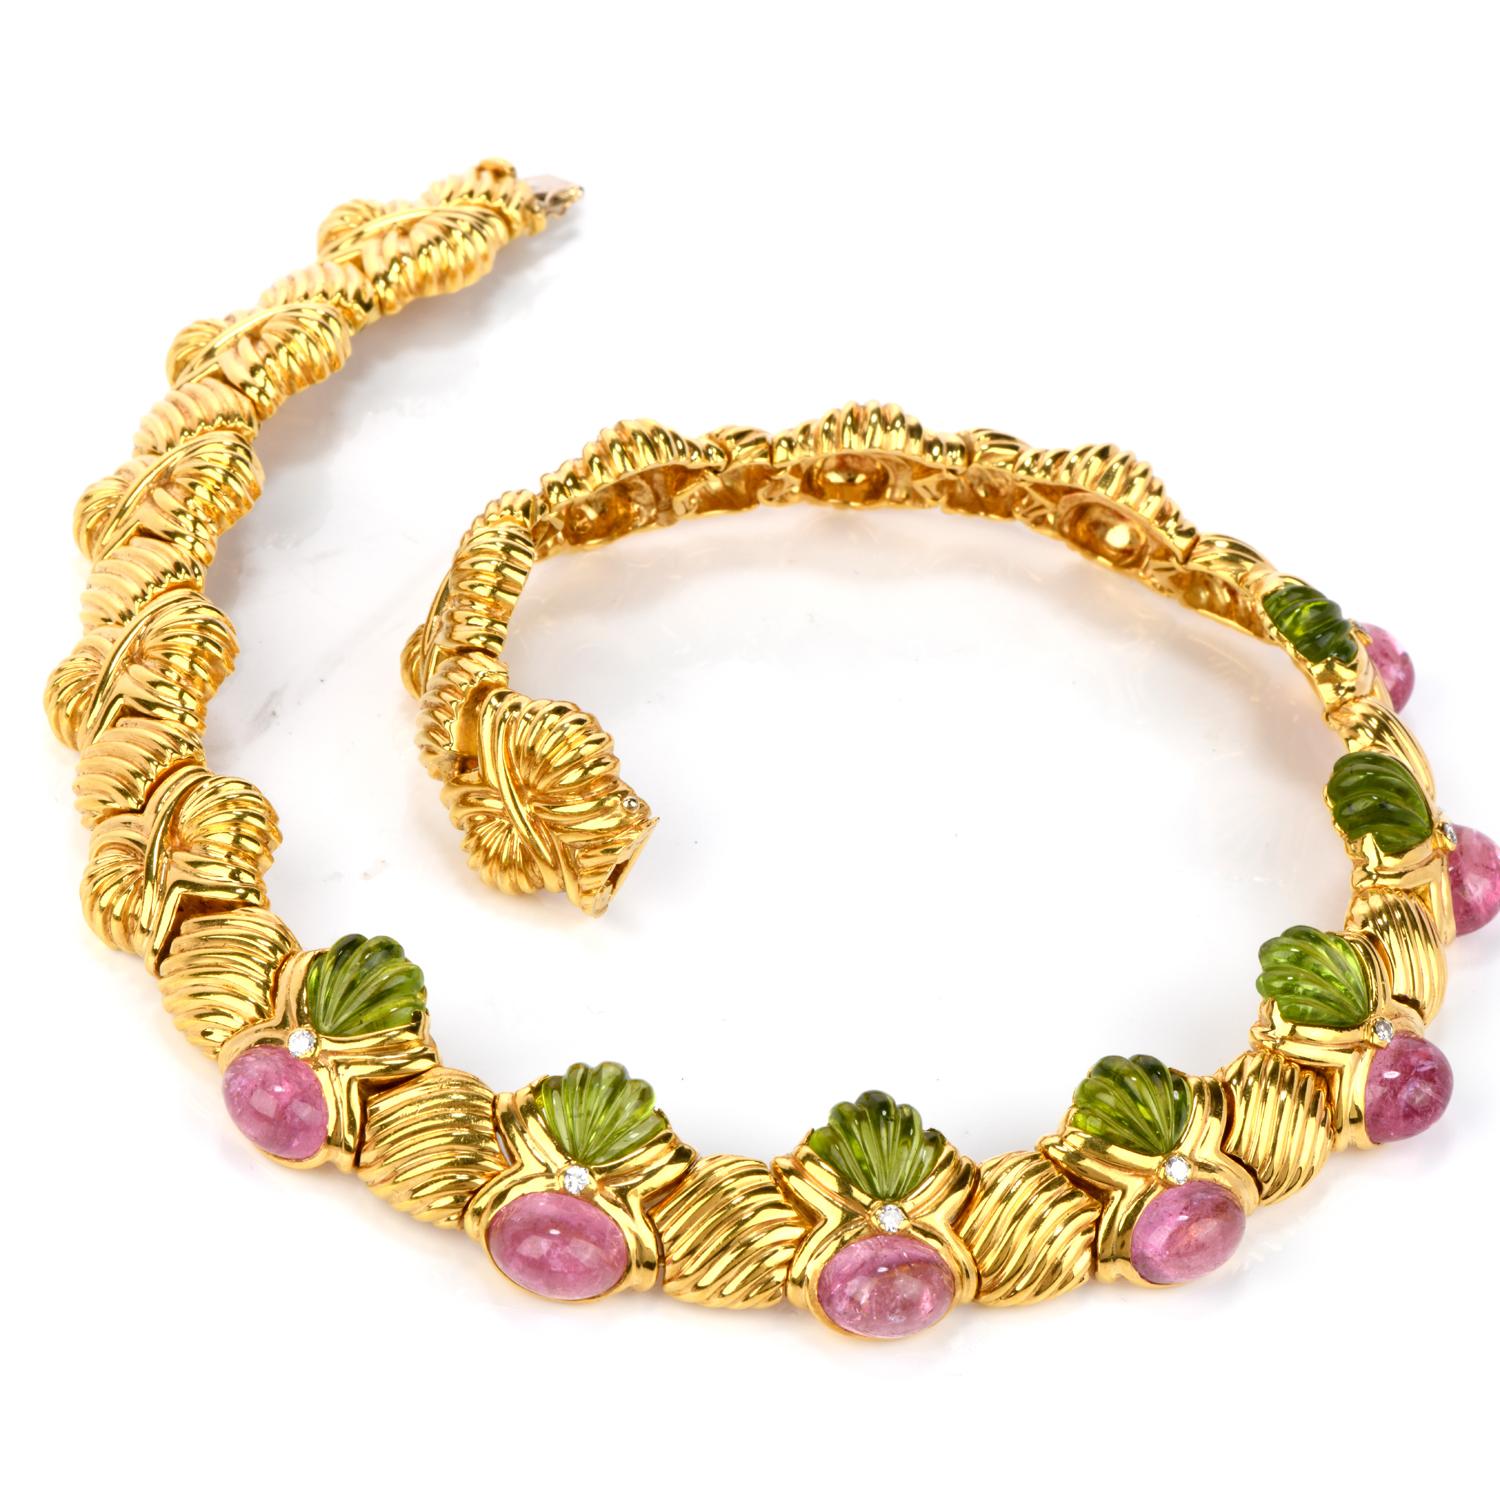 Feel gorgeous in this beguiling Estate Diamond Peridot & Tourmaline 18K Gold Collar Necklace!  This Italian-made necklace weighs an impressive 156.4 Grams of 18k yellow gold and has the collar length of 16 Inches with a 20 mm width. 

There are 7